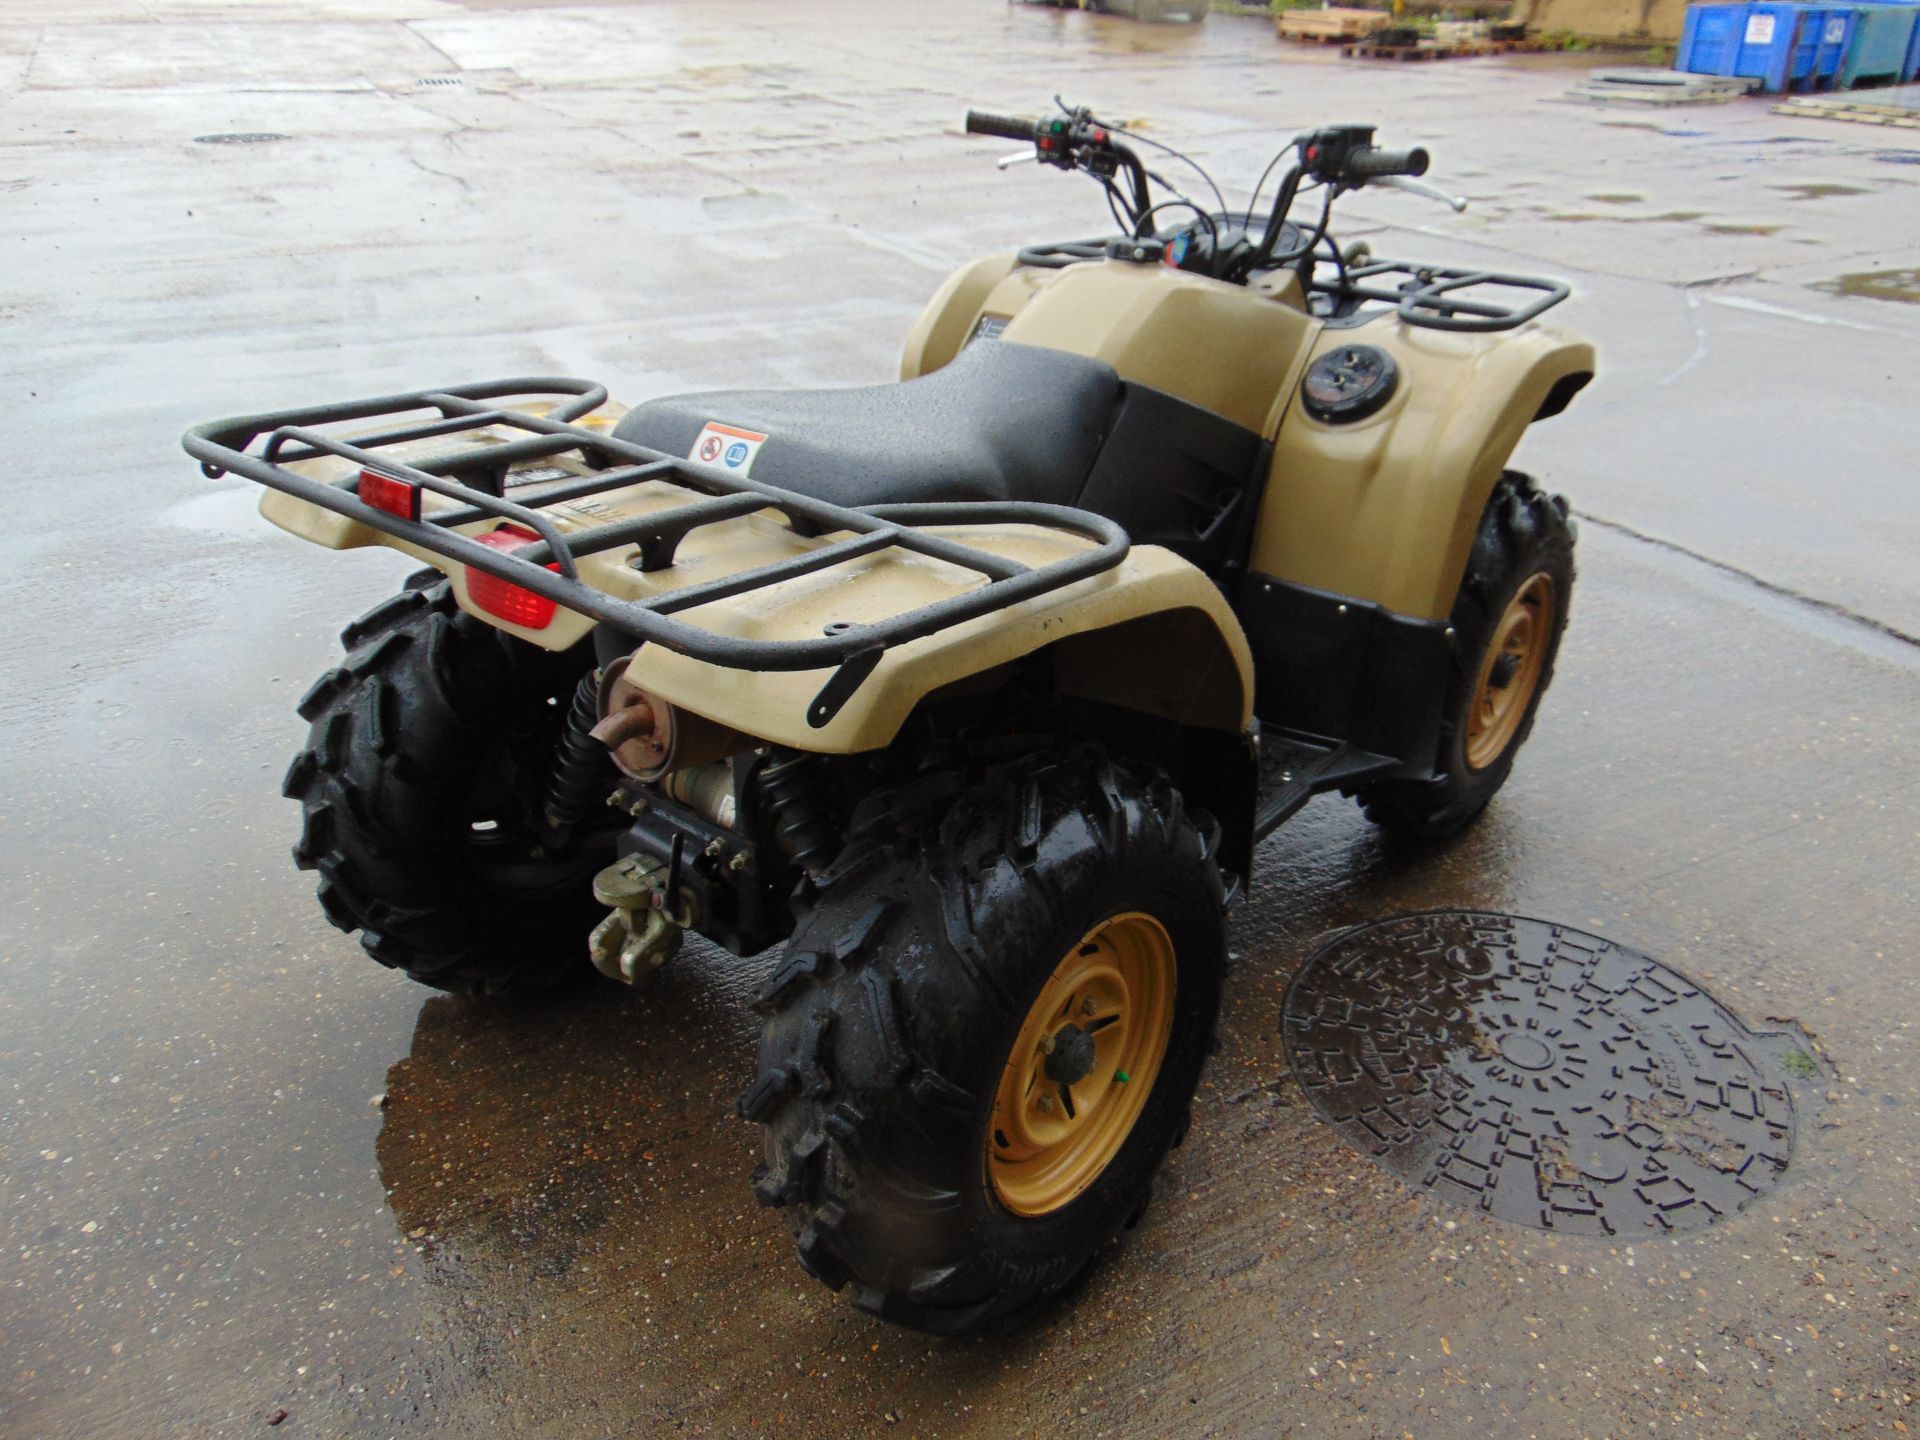 Yamaha Grizzly 450 4 x 4 ATV Quad Bike 1518 hours only from MOD - Image 6 of 24